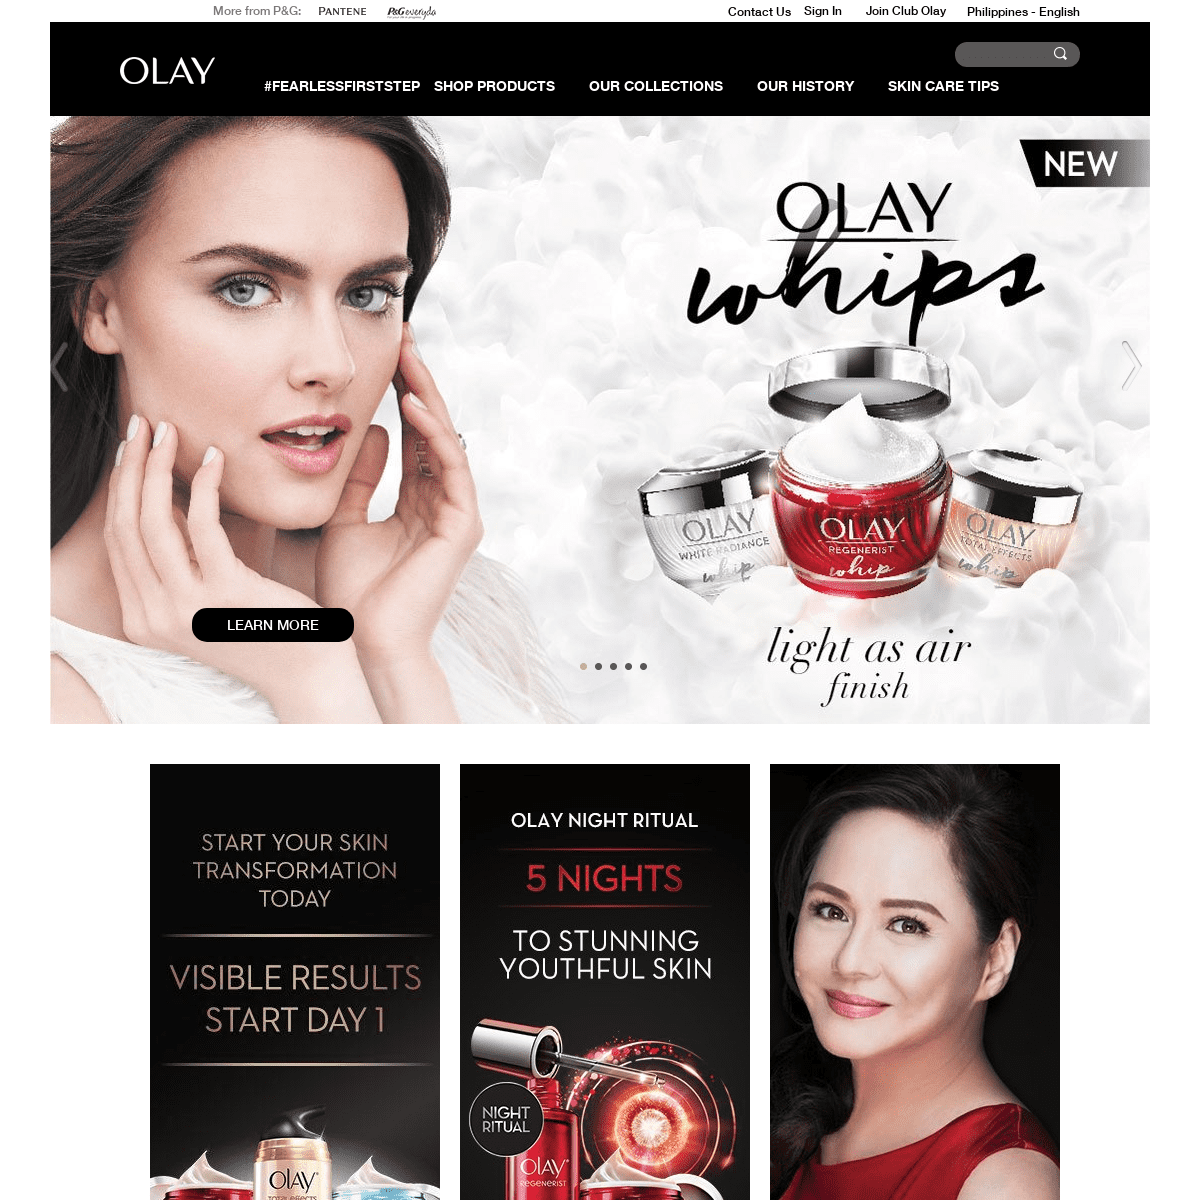 A complete backup of olay.com.ph